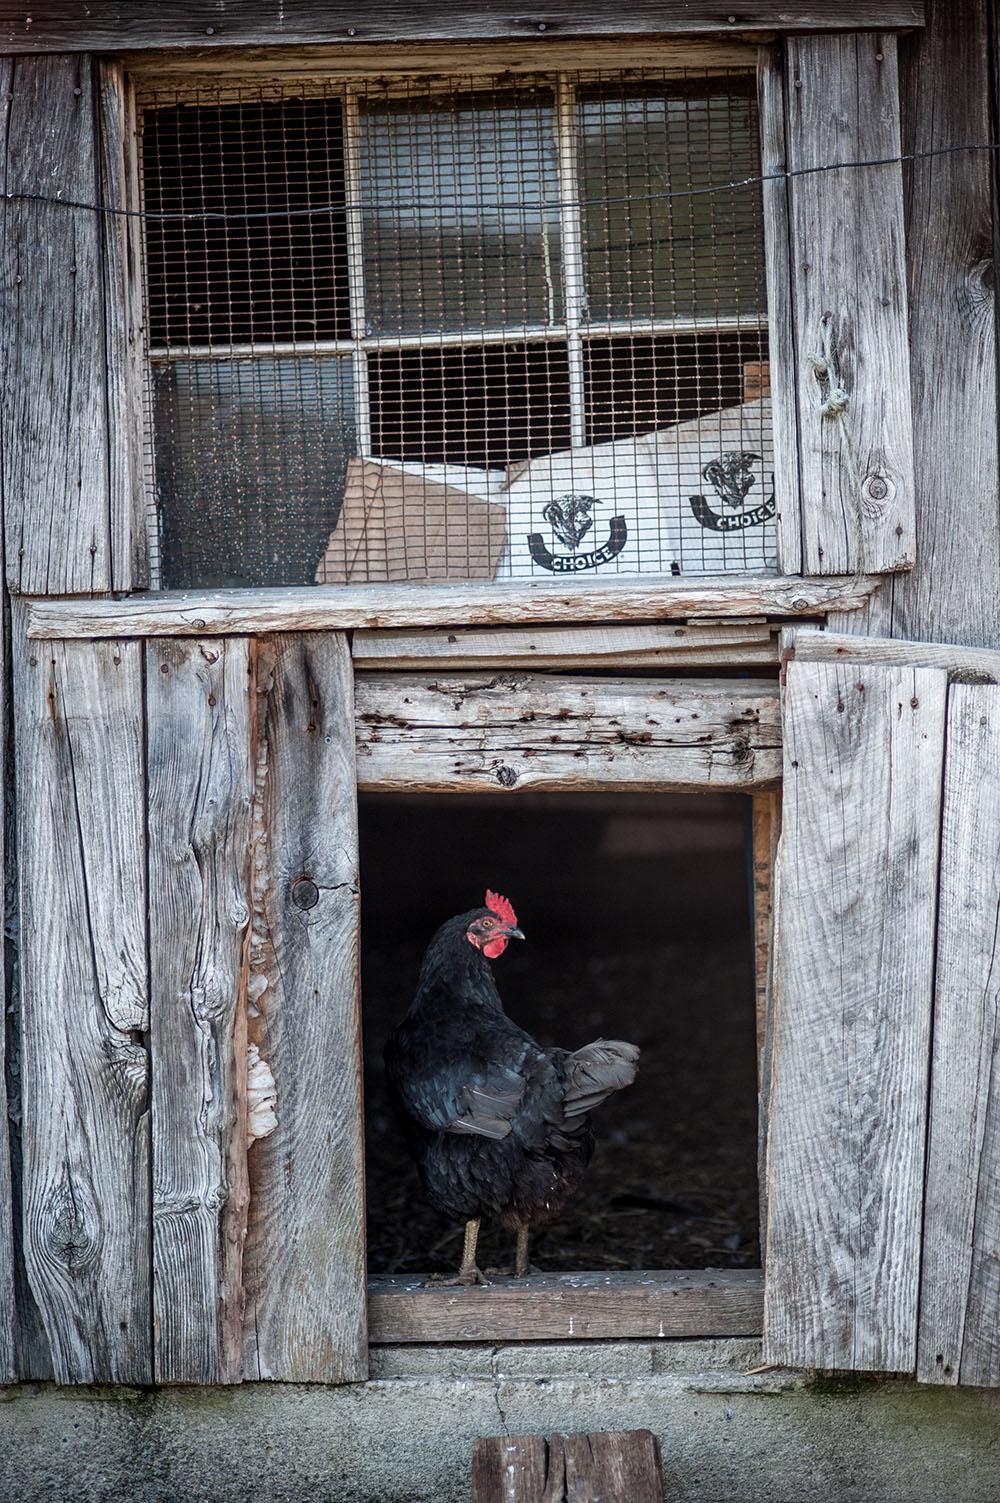 Chicken coop at Bunten Farm in Orford, New Hampshire.